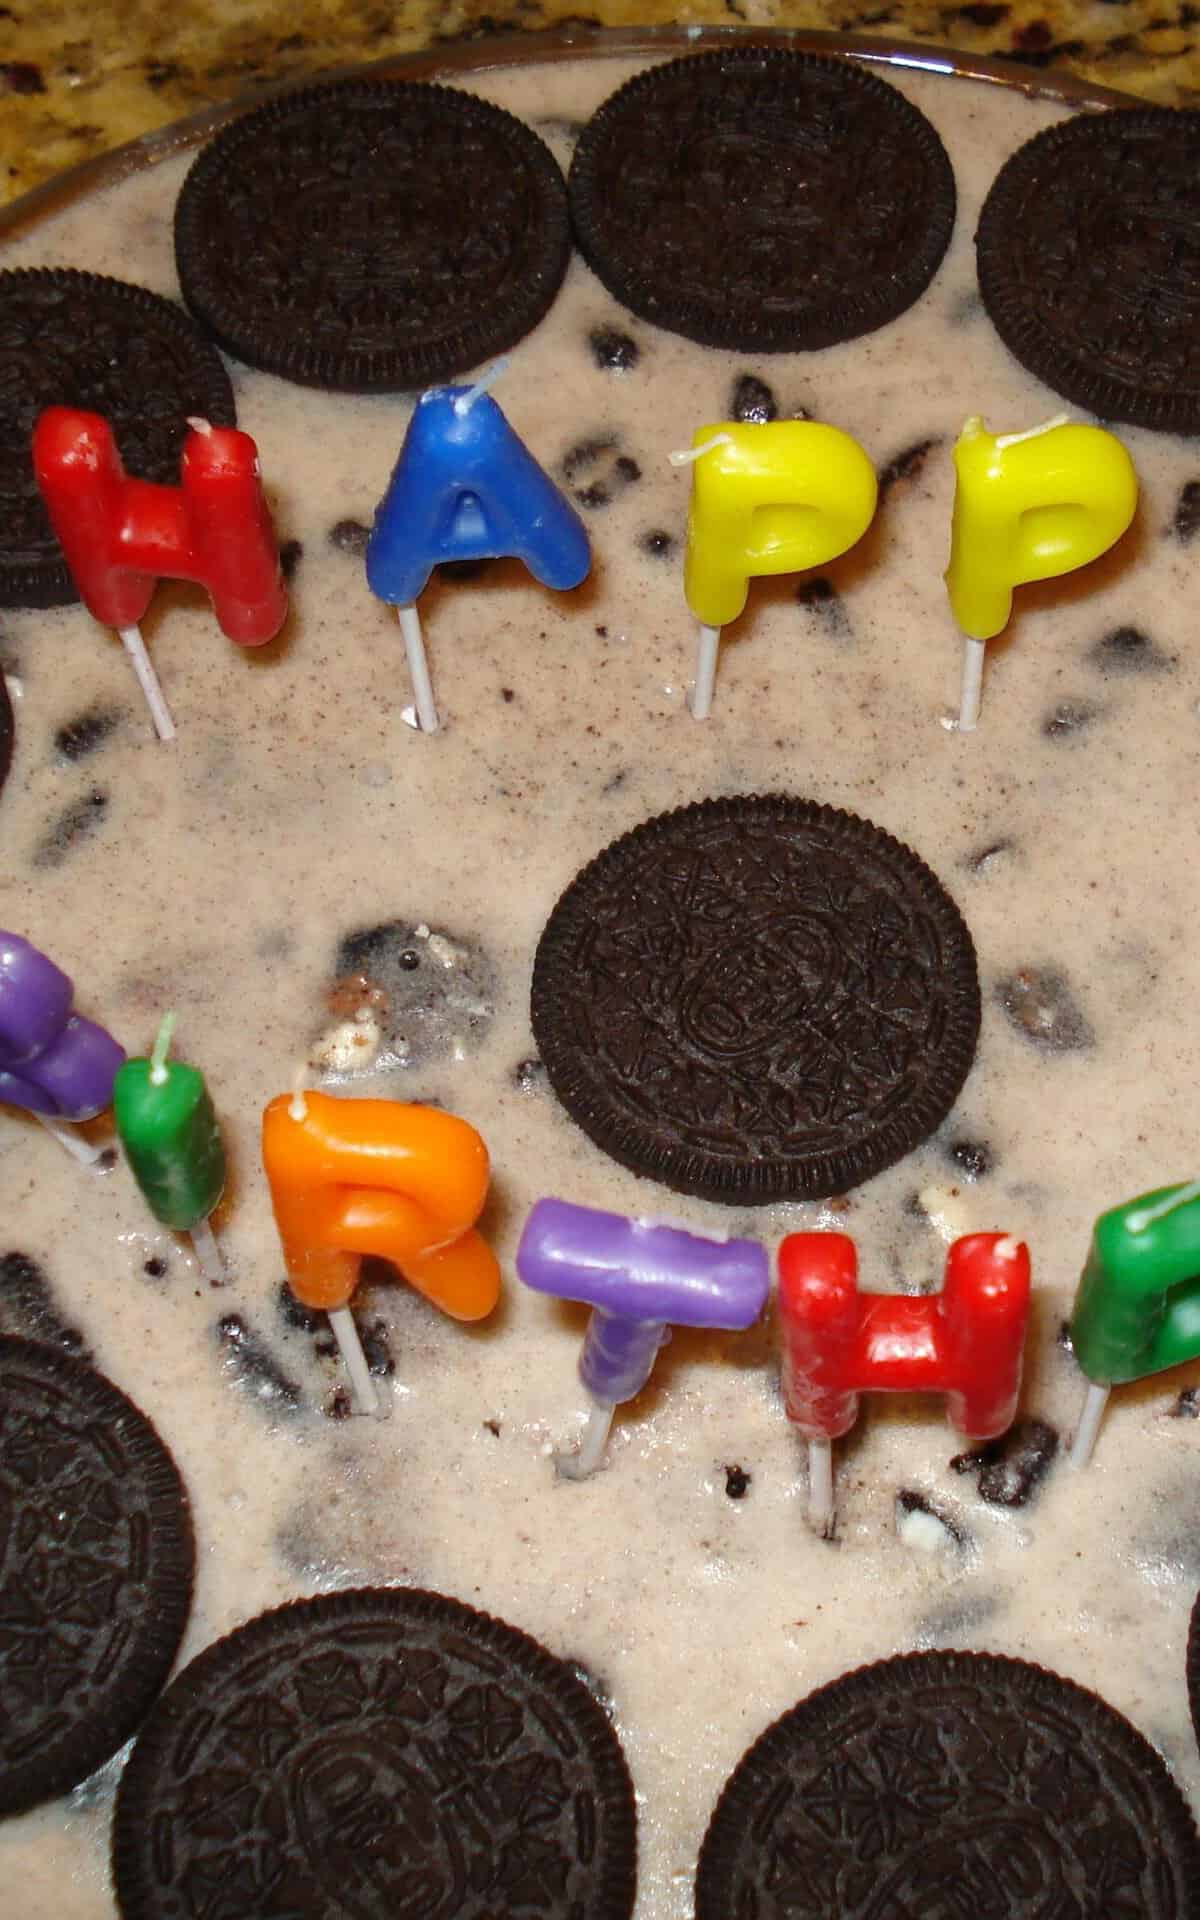 Sure, here are 11 unique photo captions for the Oreo White Chocolate Mousse Cake: